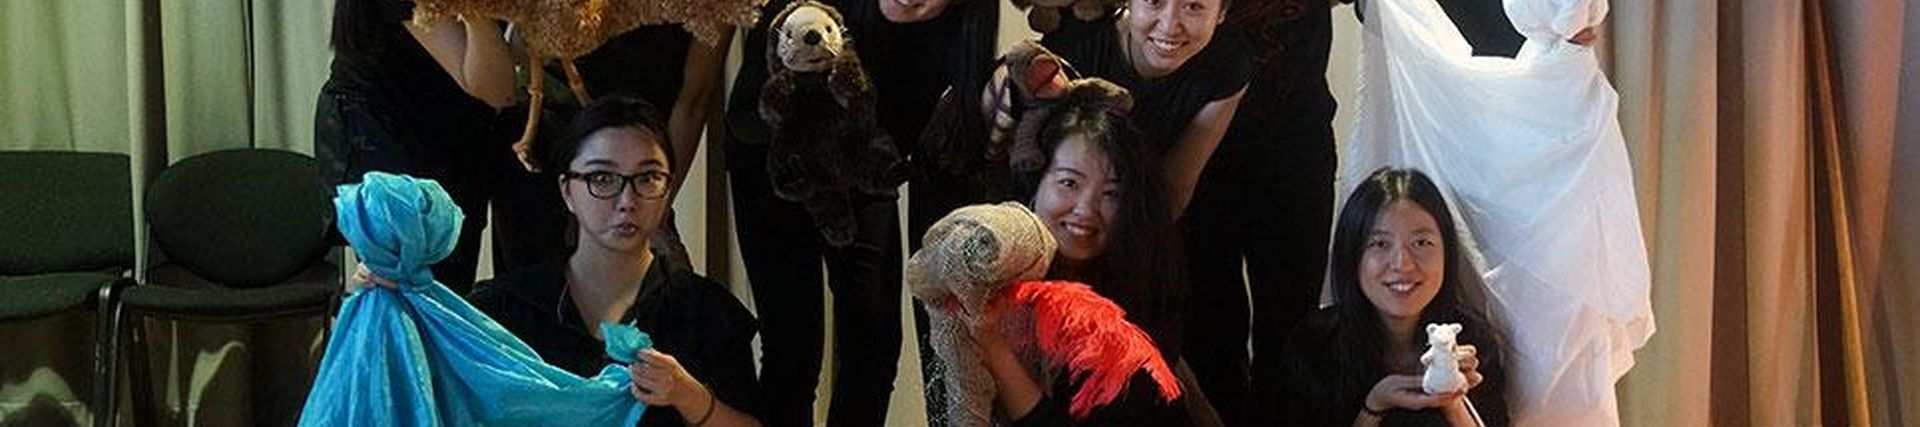 Artists posing with puppets